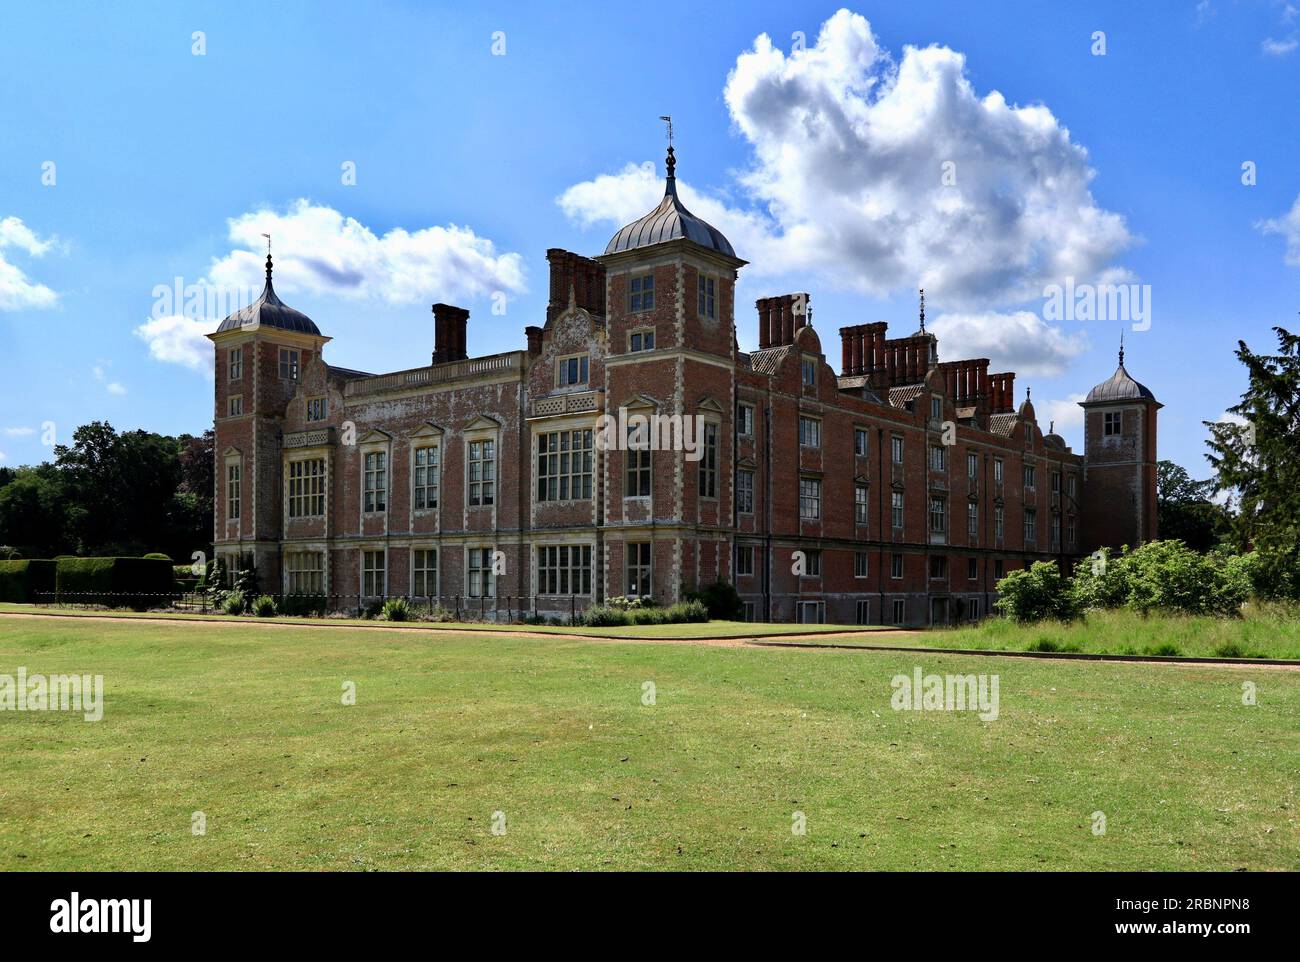 The North West aspect of Blickling Hall. Stock Photo